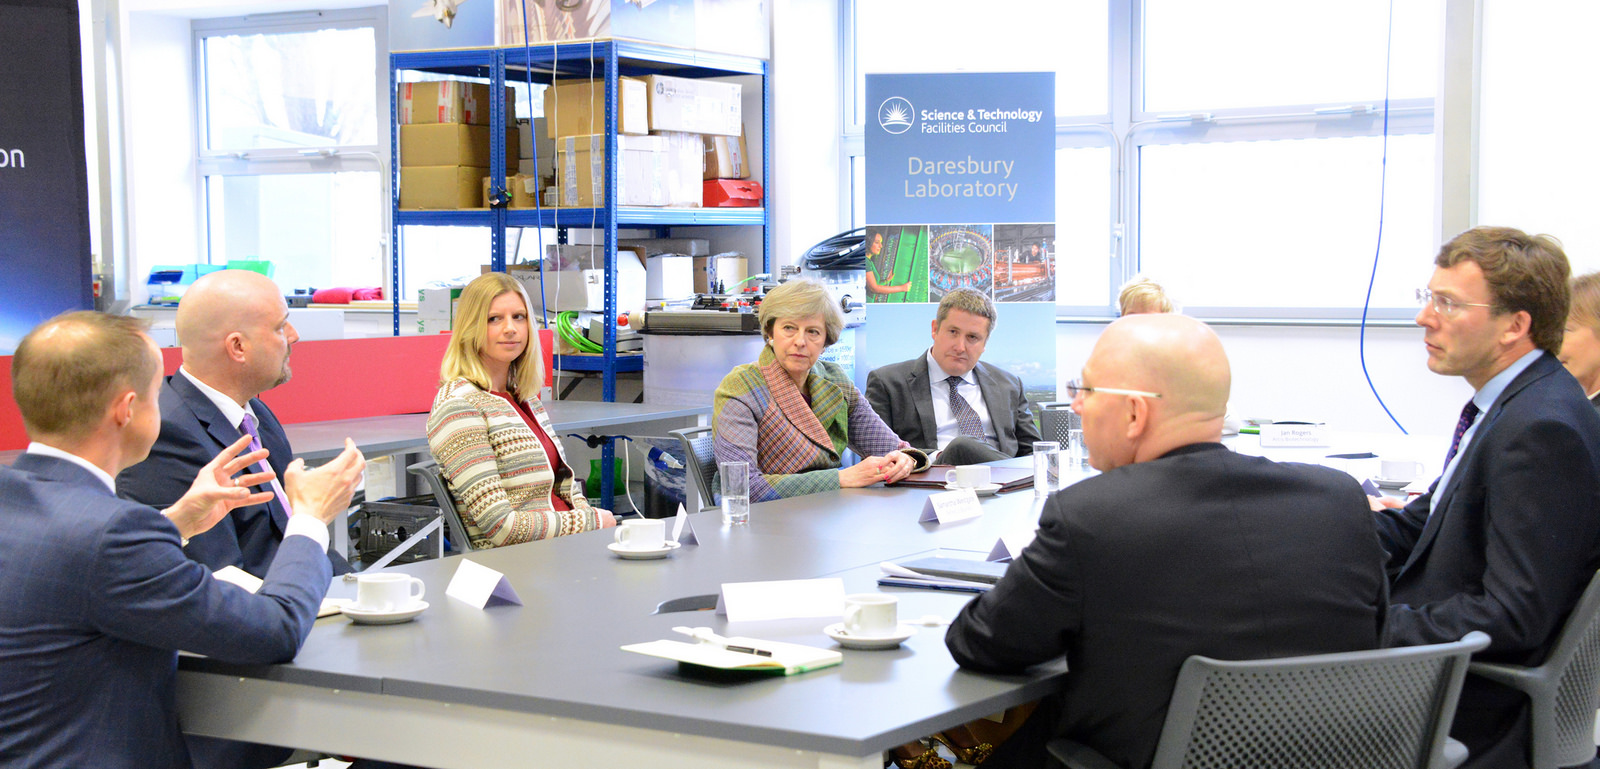 Perfectus Biomed CEO Meets with the Prime Minister Theresa May in Round Table Discussion